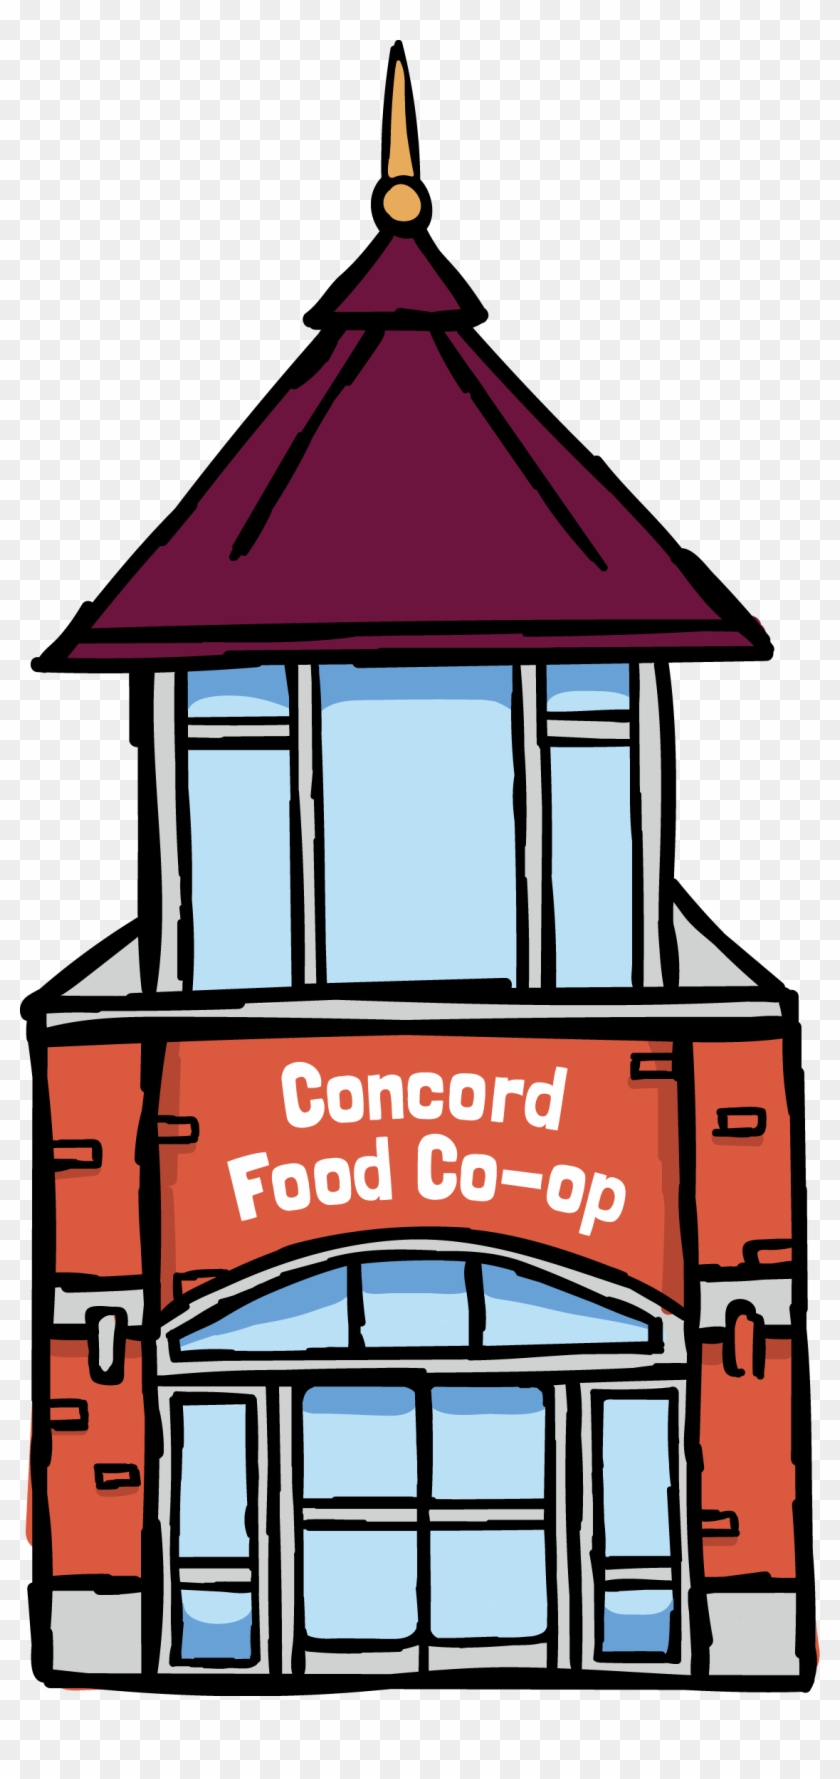 About - Concord Food Co-op #564439